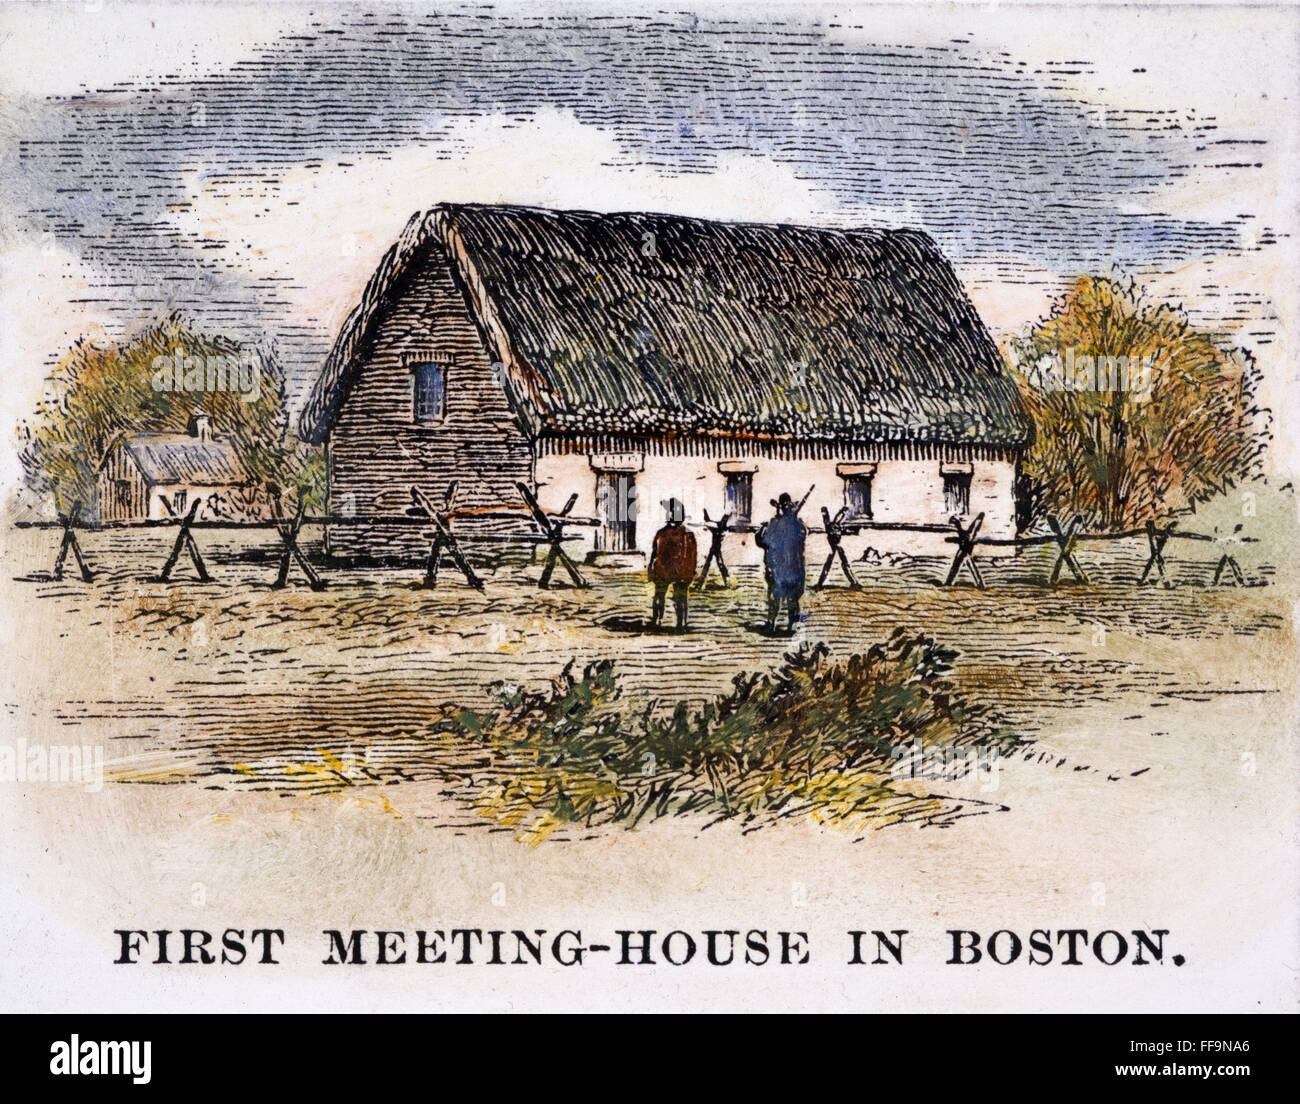 BOSTON: FIRST CHURCH. /nThe first house of worship in Boston, Massachusetts. Engraving, 19th century. Stock Photo